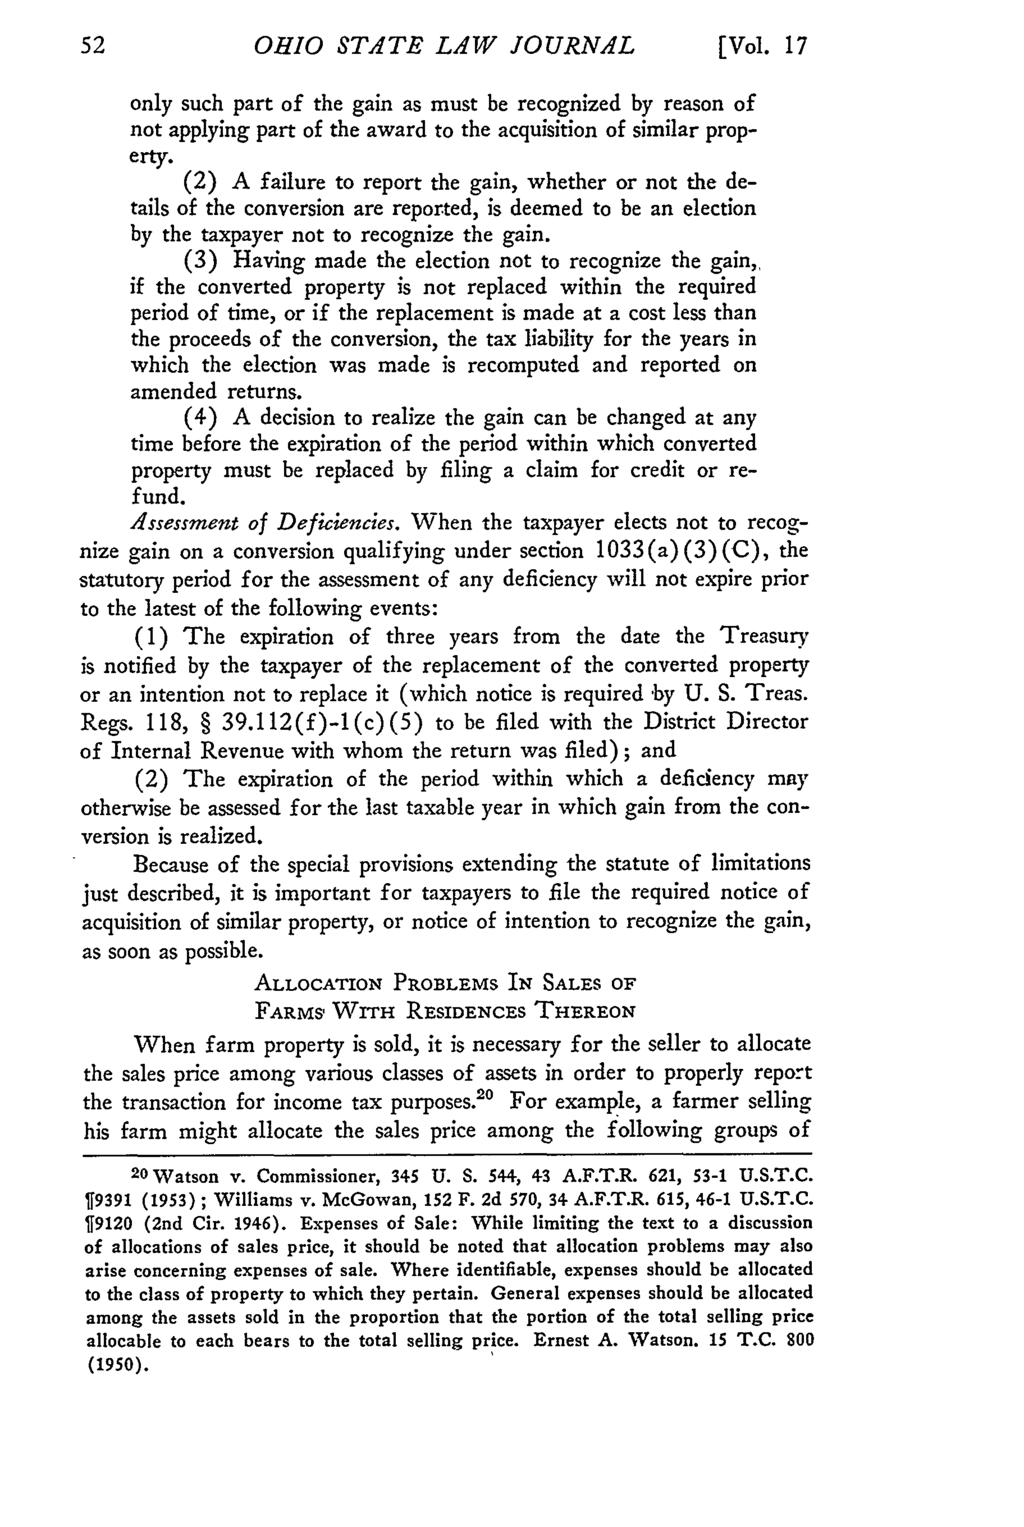 OHIO STATE LAW JOURNAL [Vol. 17 only such part of the gain as must be recognized by reason of not applying part of the award to the acquisition of similar property.